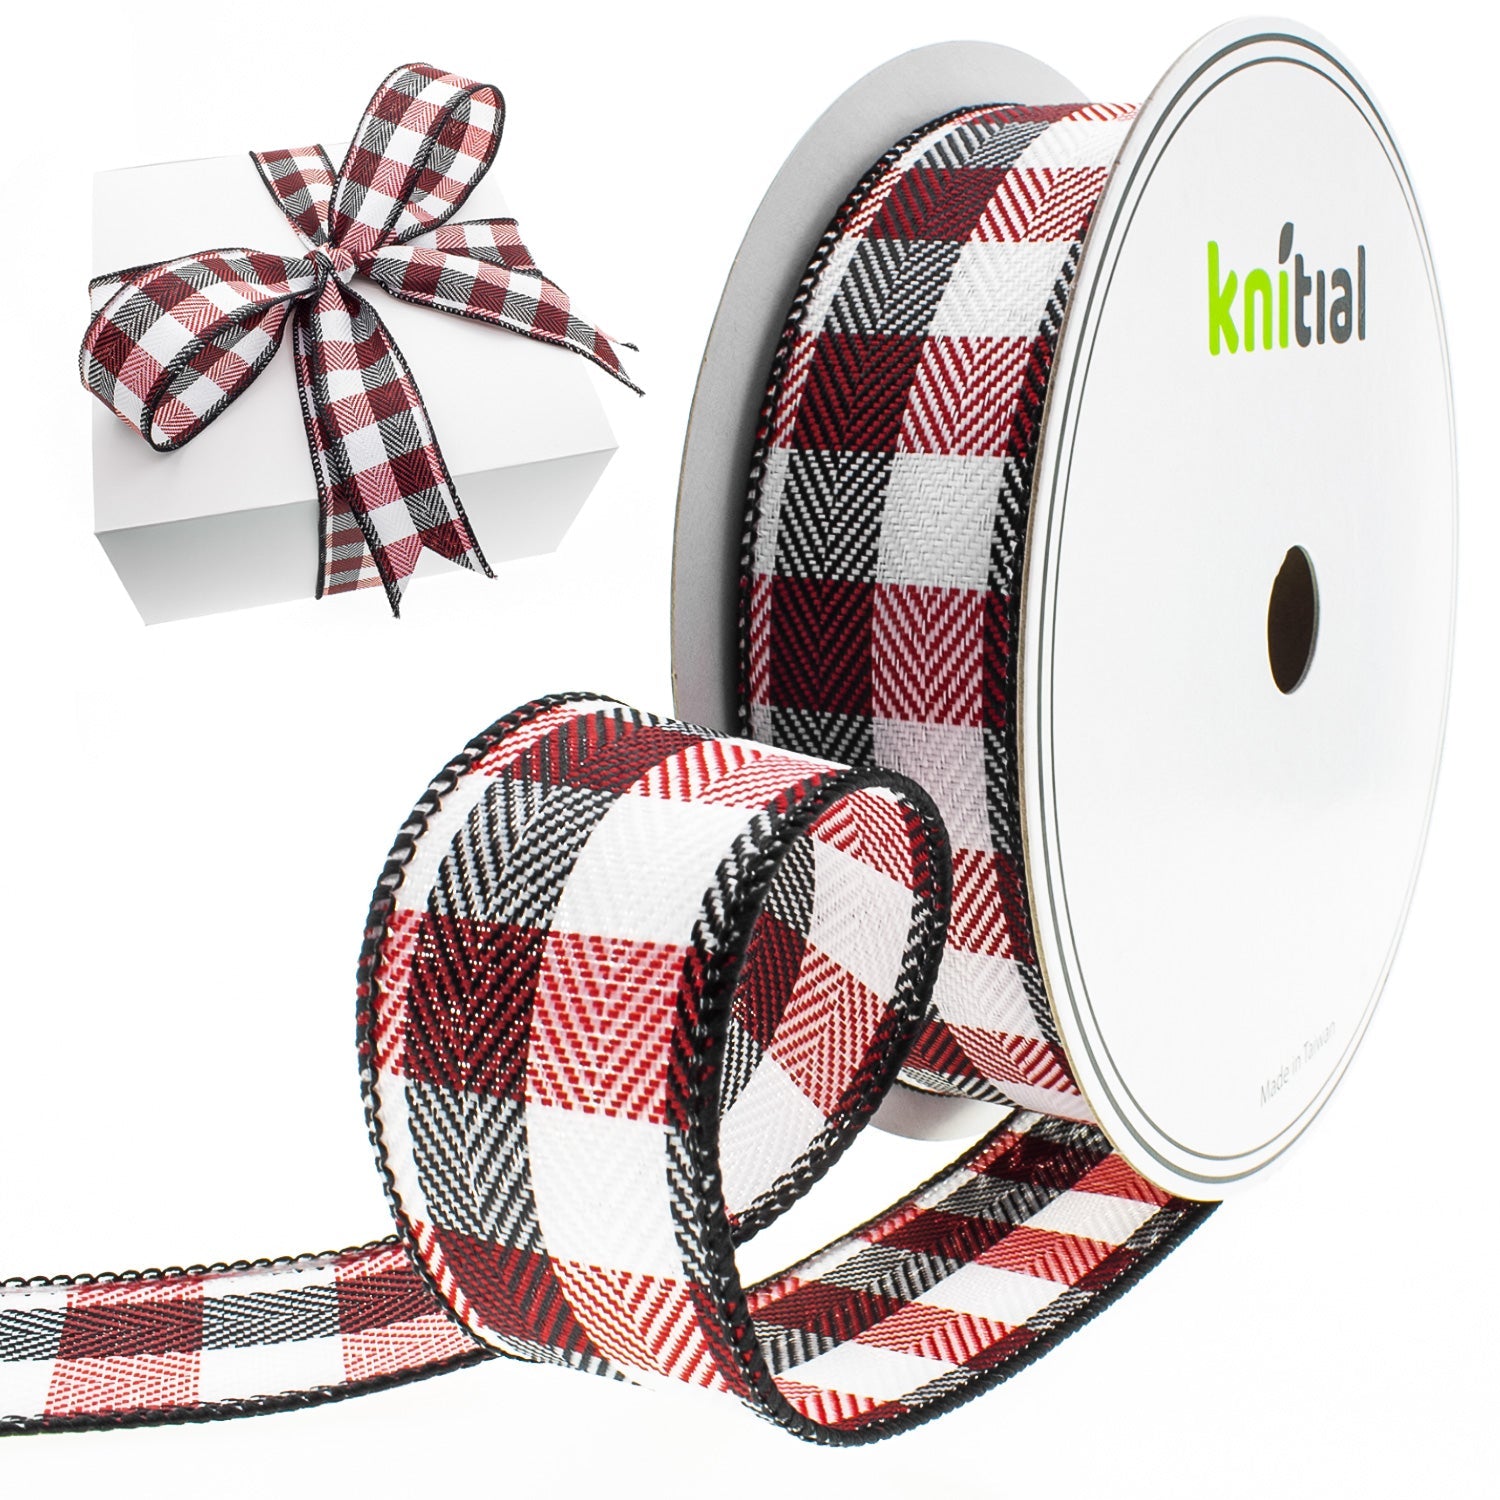 Knitial Wired Buffalo Multicolor Plaid Ribbon Red, Black, and White 1-1/2" x 25 Yards